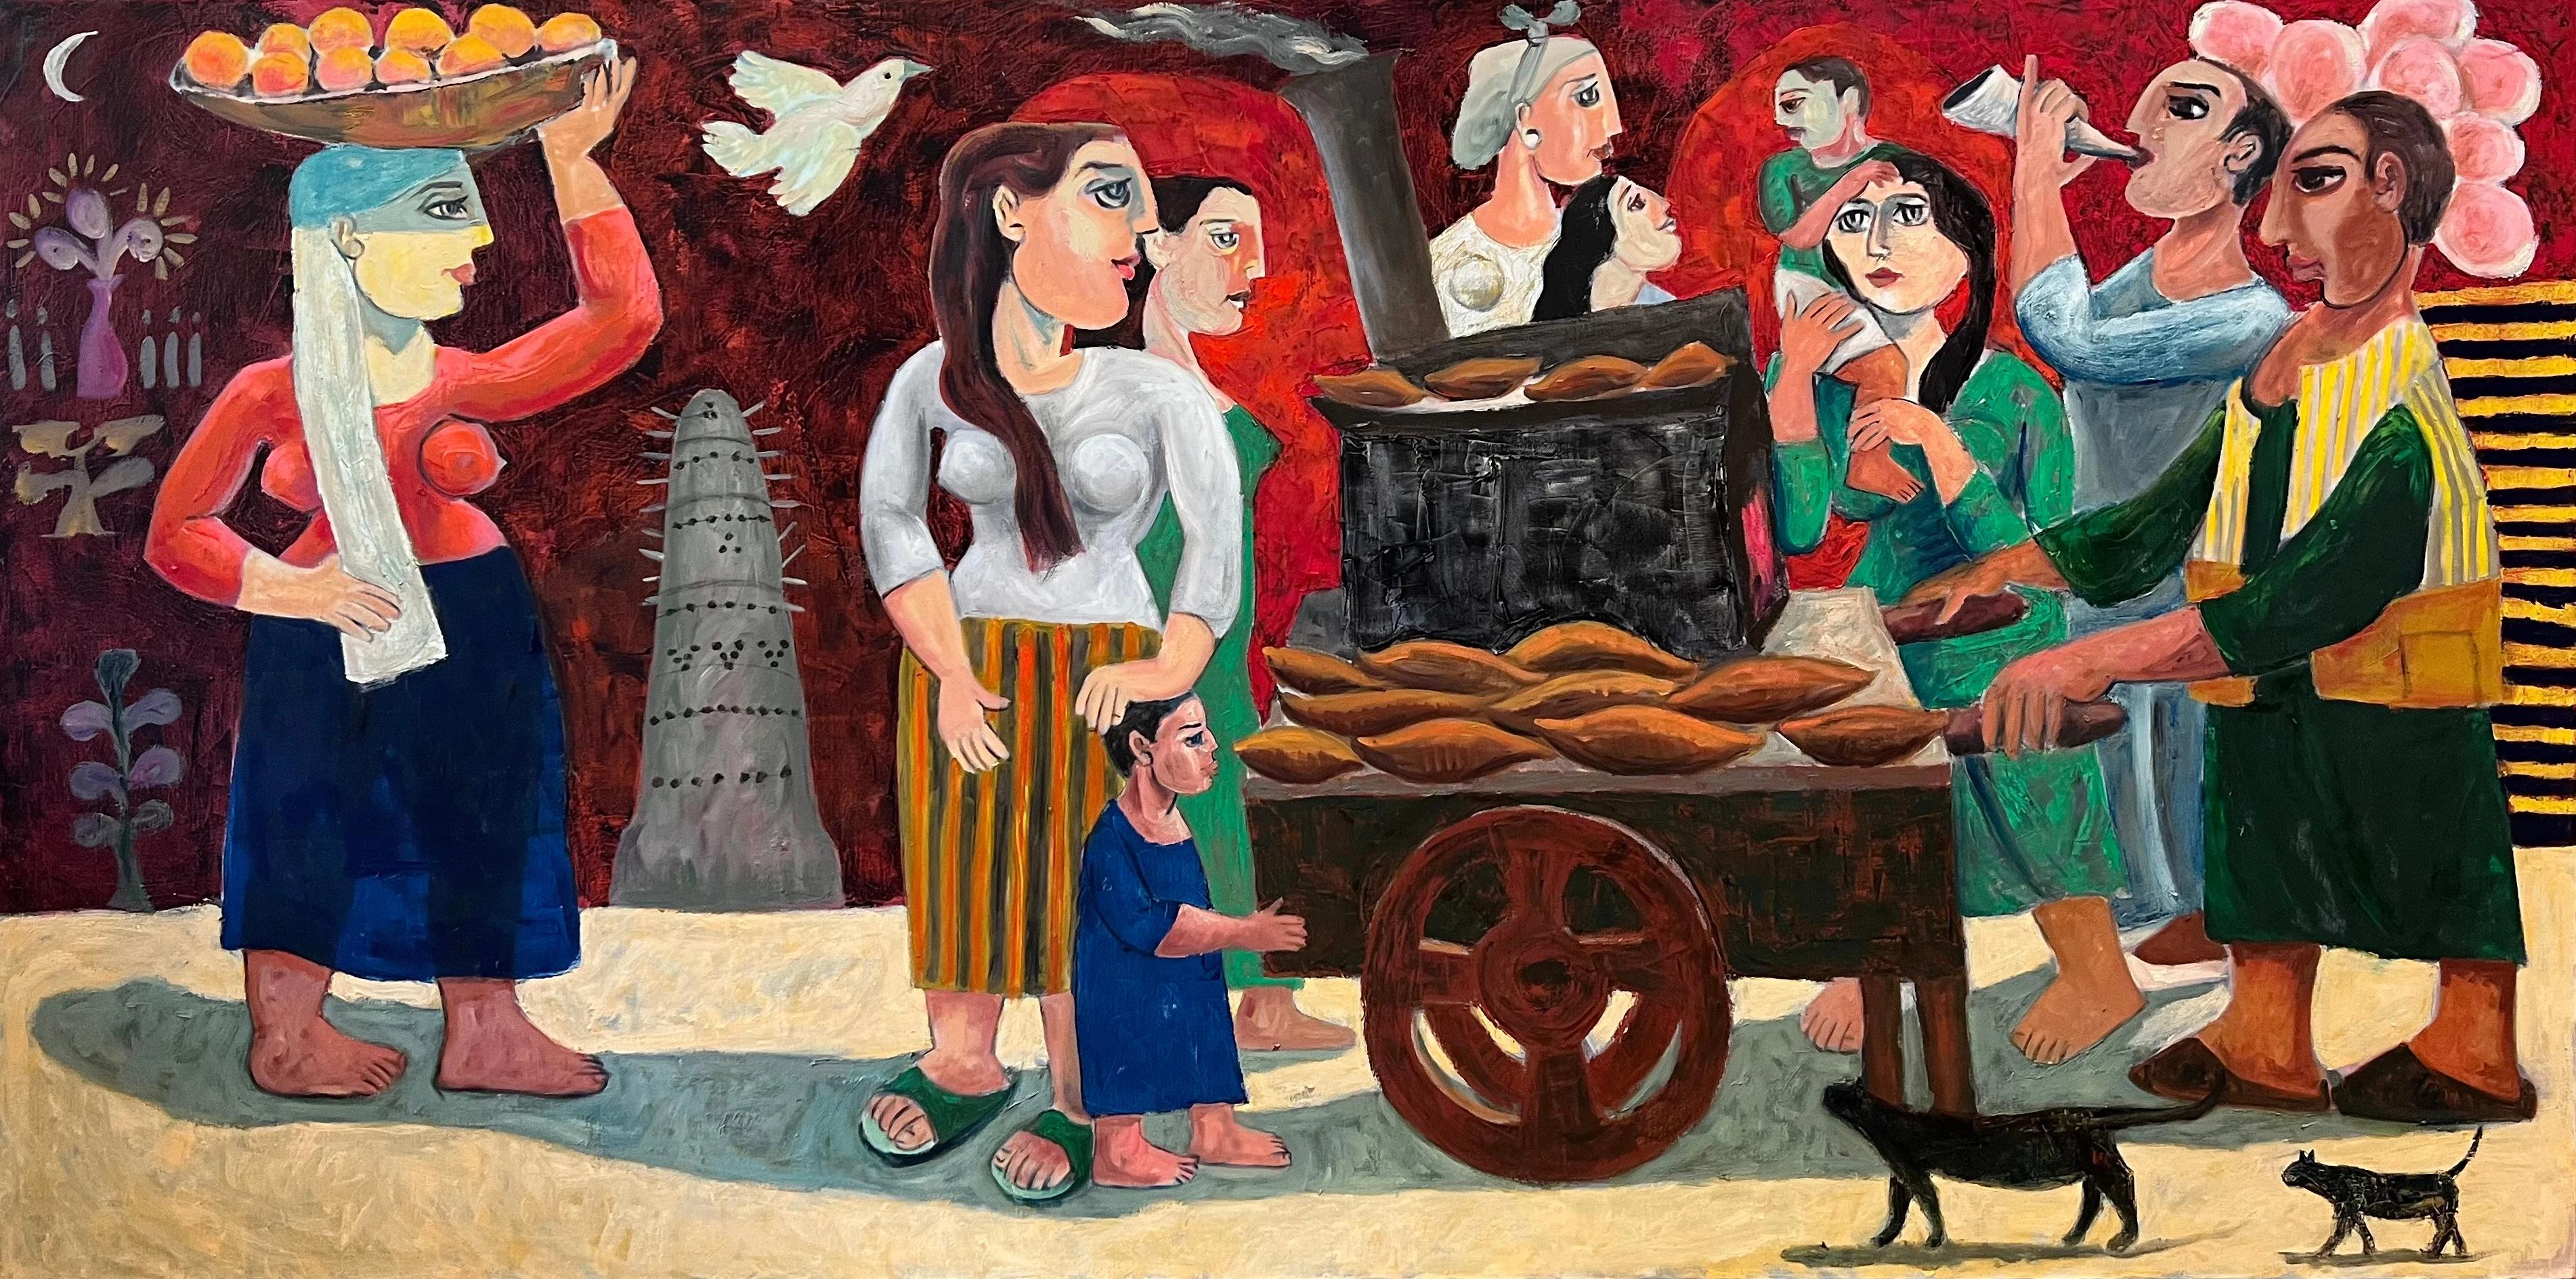 "Friday Market" Oil painting 39" x 79" inch by Omar Abdel Zaher


Abdel Zaher is a graduate of the Academy of Fine Arts in Helwan and has been painting for three decades and has notably featured in a variety of collective exhibitions, including